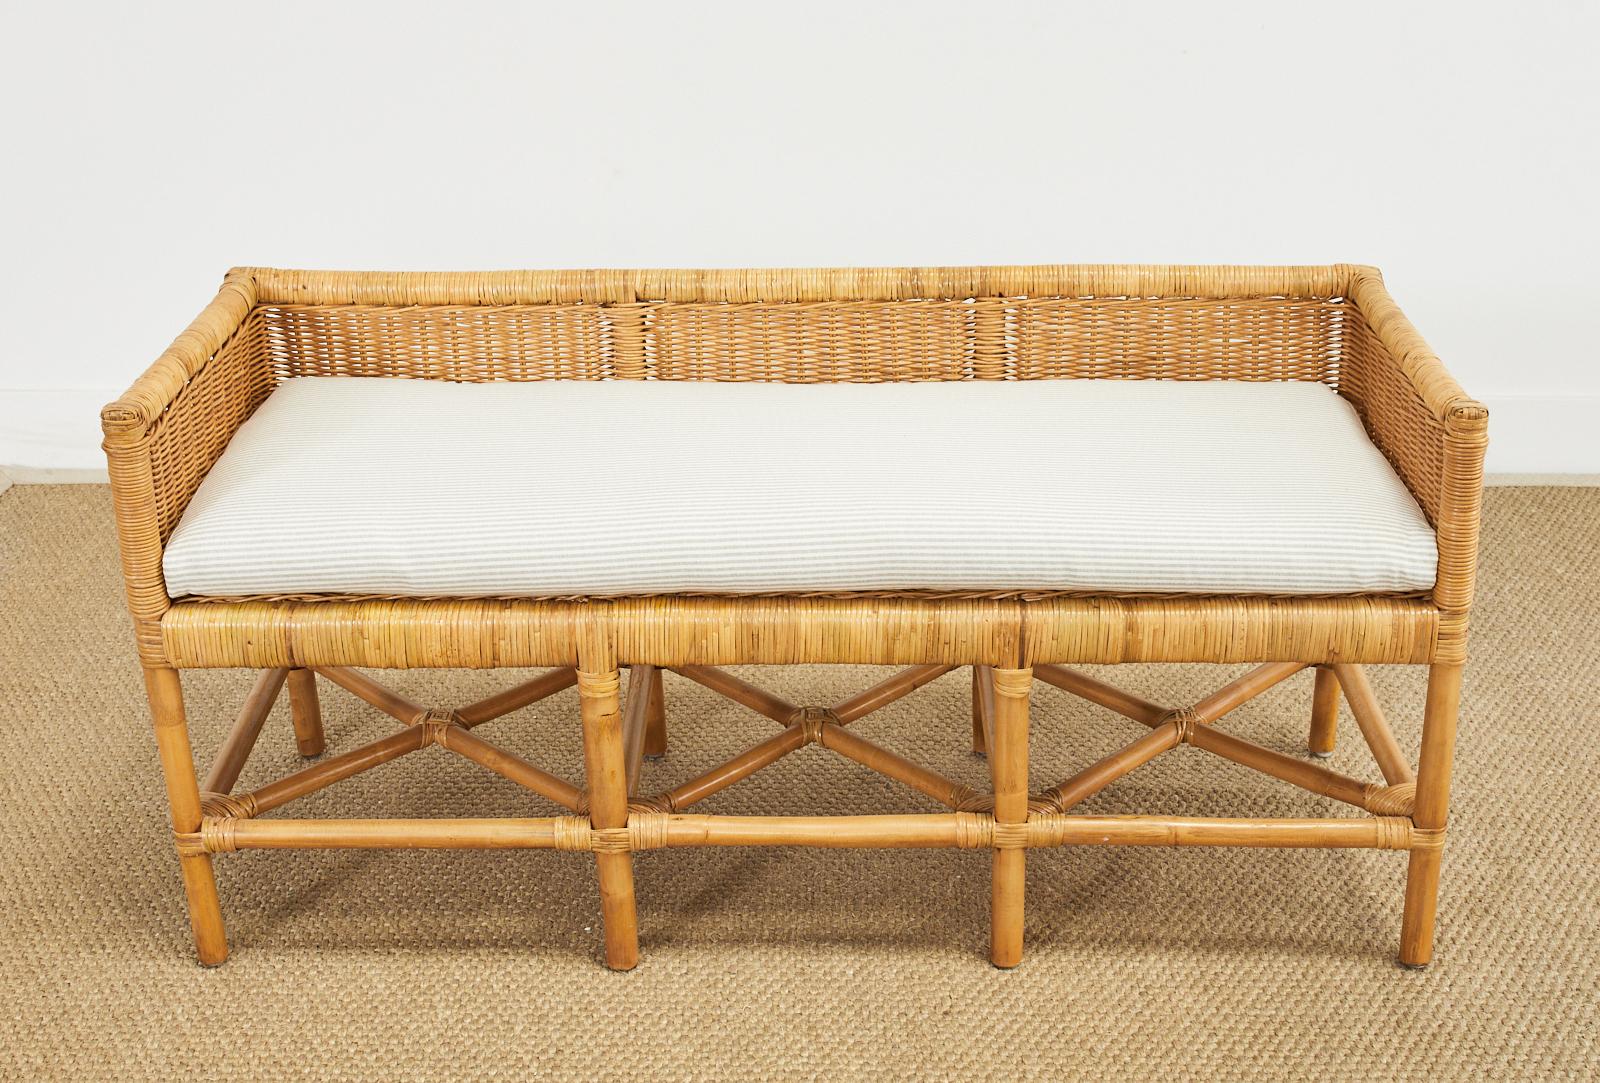 Charming rattan and wicker bench seat or settee made in the organic modern style by Tommy Hilfiger. The rectangular bench features a rattan frame with eight rattan pole legs. The rattan is covered with woven wicker and topped with a fitted seat